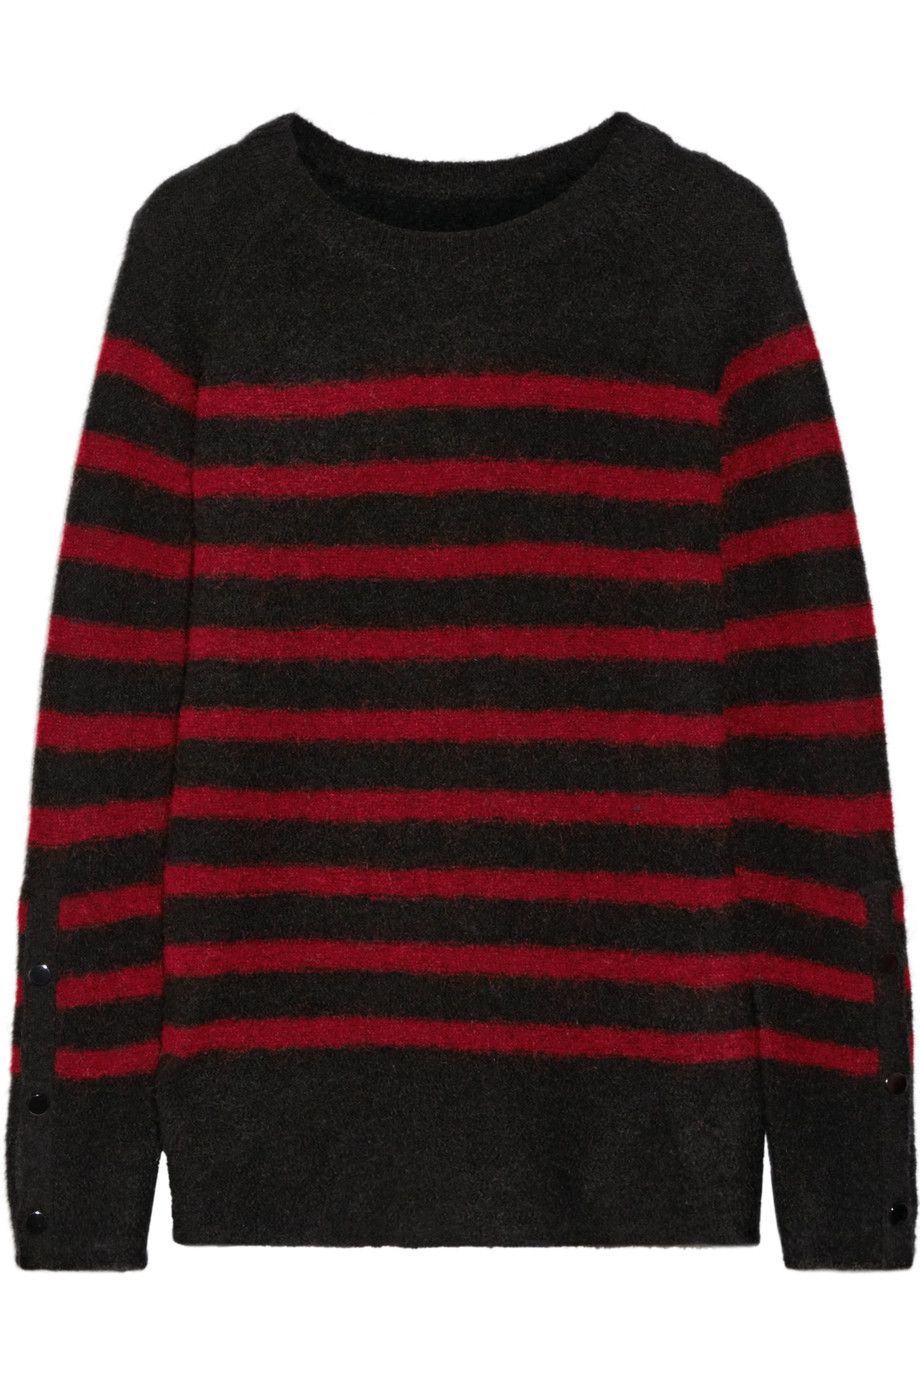 Clothing, Sweater, Black, Sleeve, Red, Wool, Long-sleeved t-shirt, Woolen, Outerwear, Jersey, 